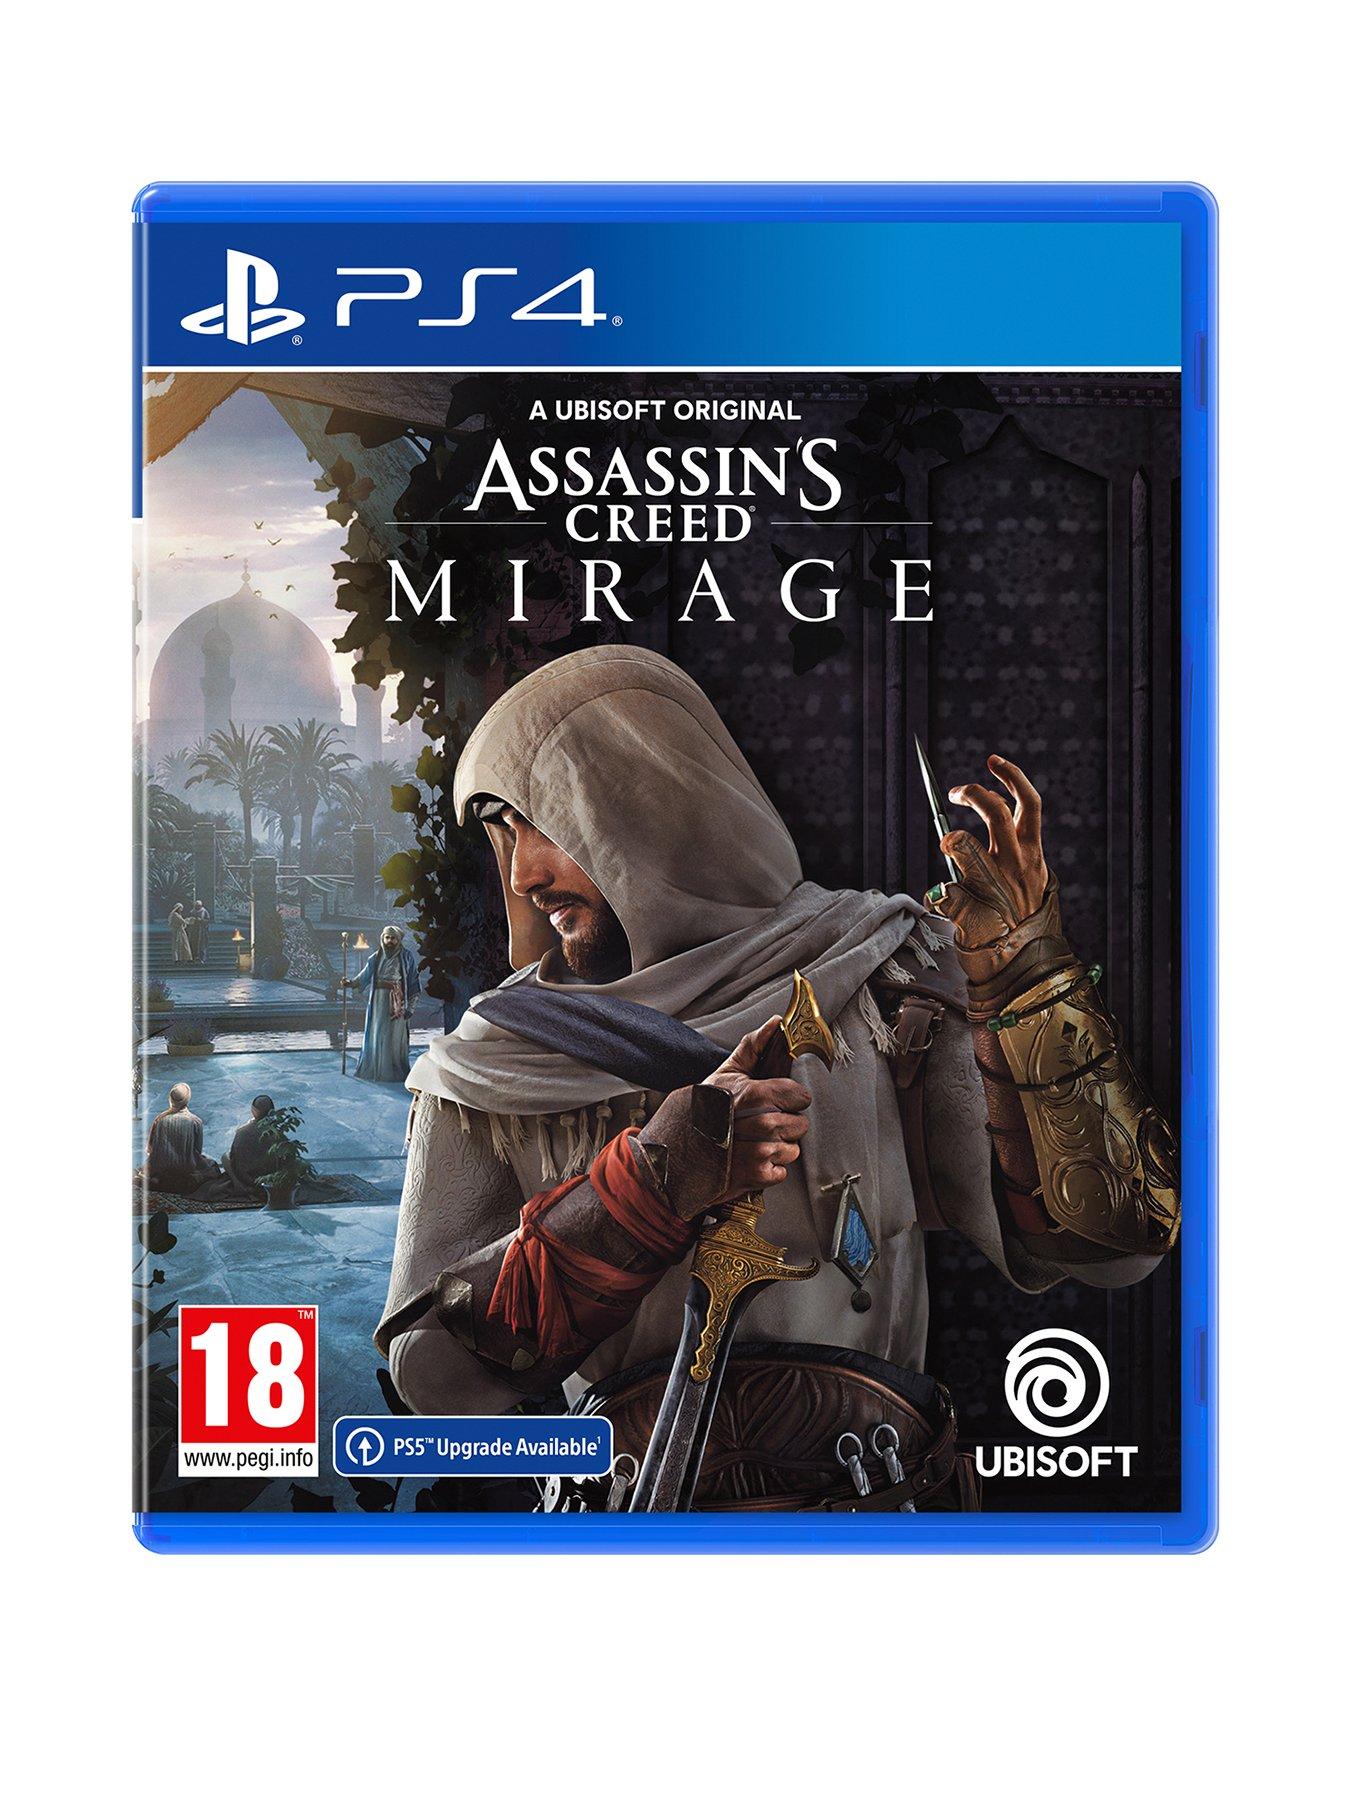 Assassin's Creed Origins (Playstation 4 PS4) It all Starts with One